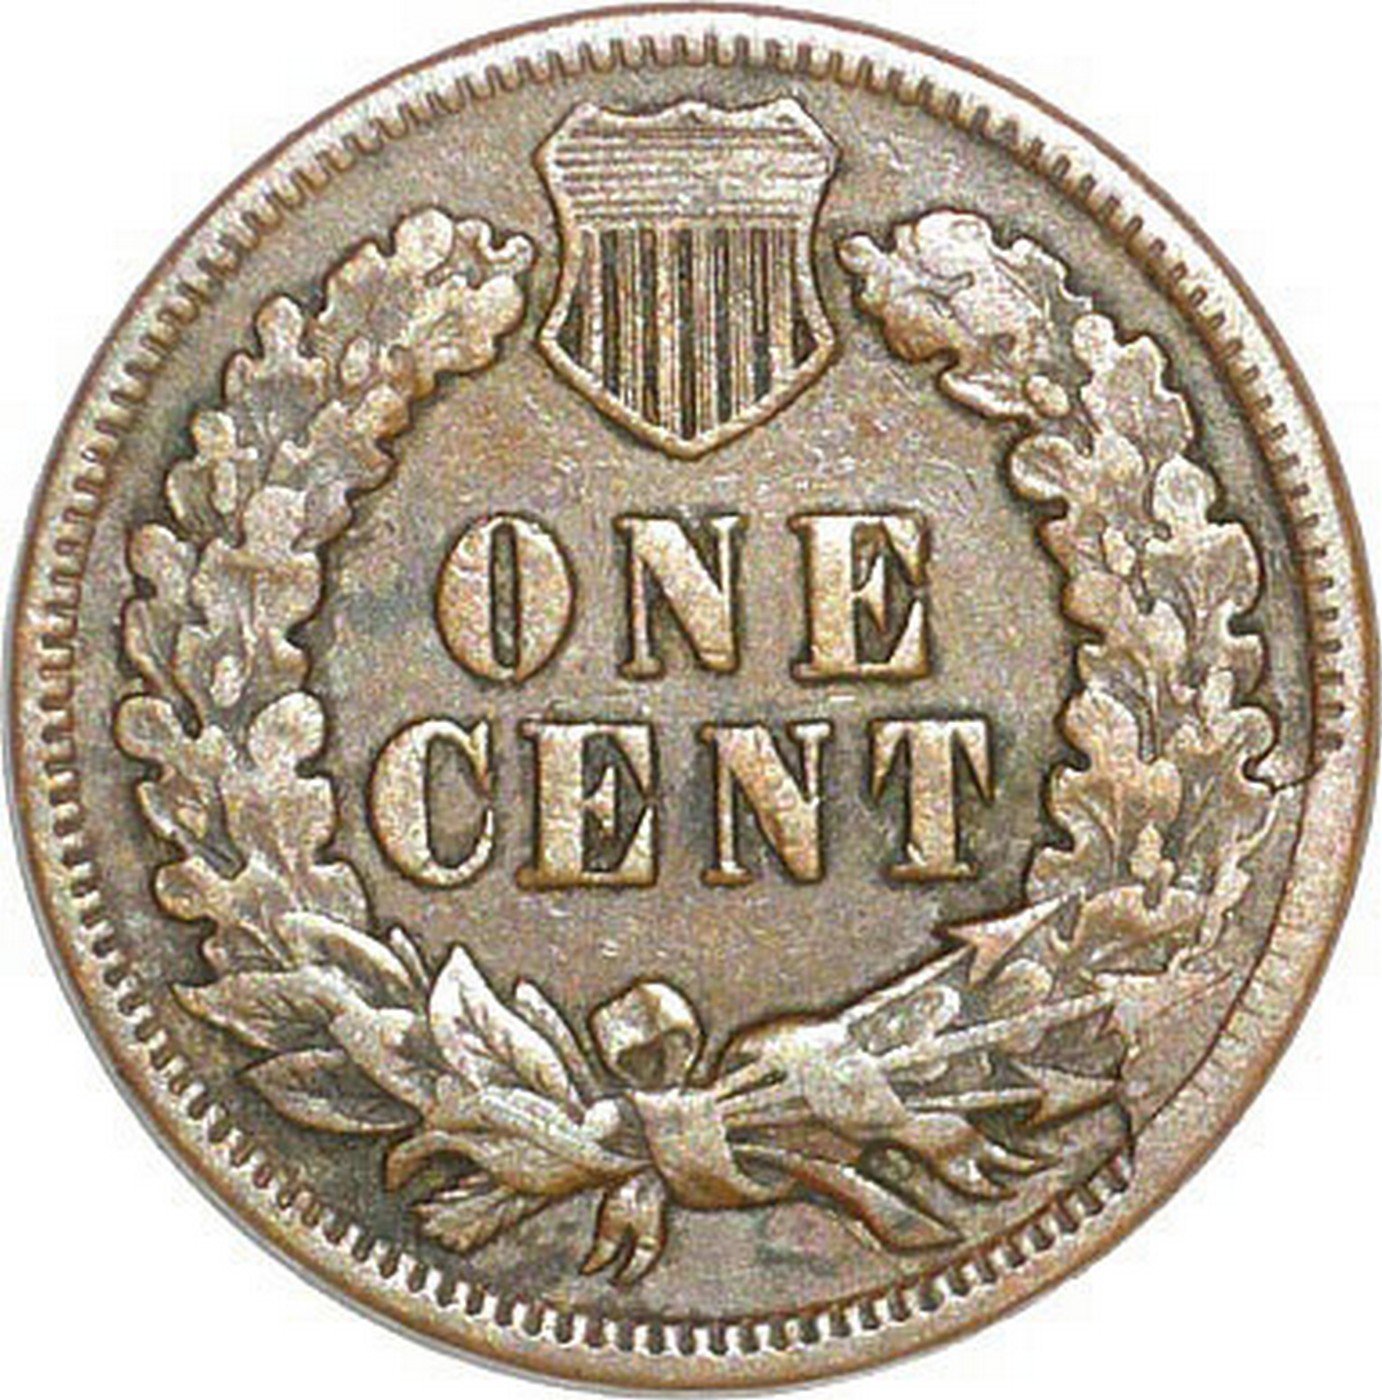 1905 CUD-004 - Indian Head Cent - Photo by David Poliquin